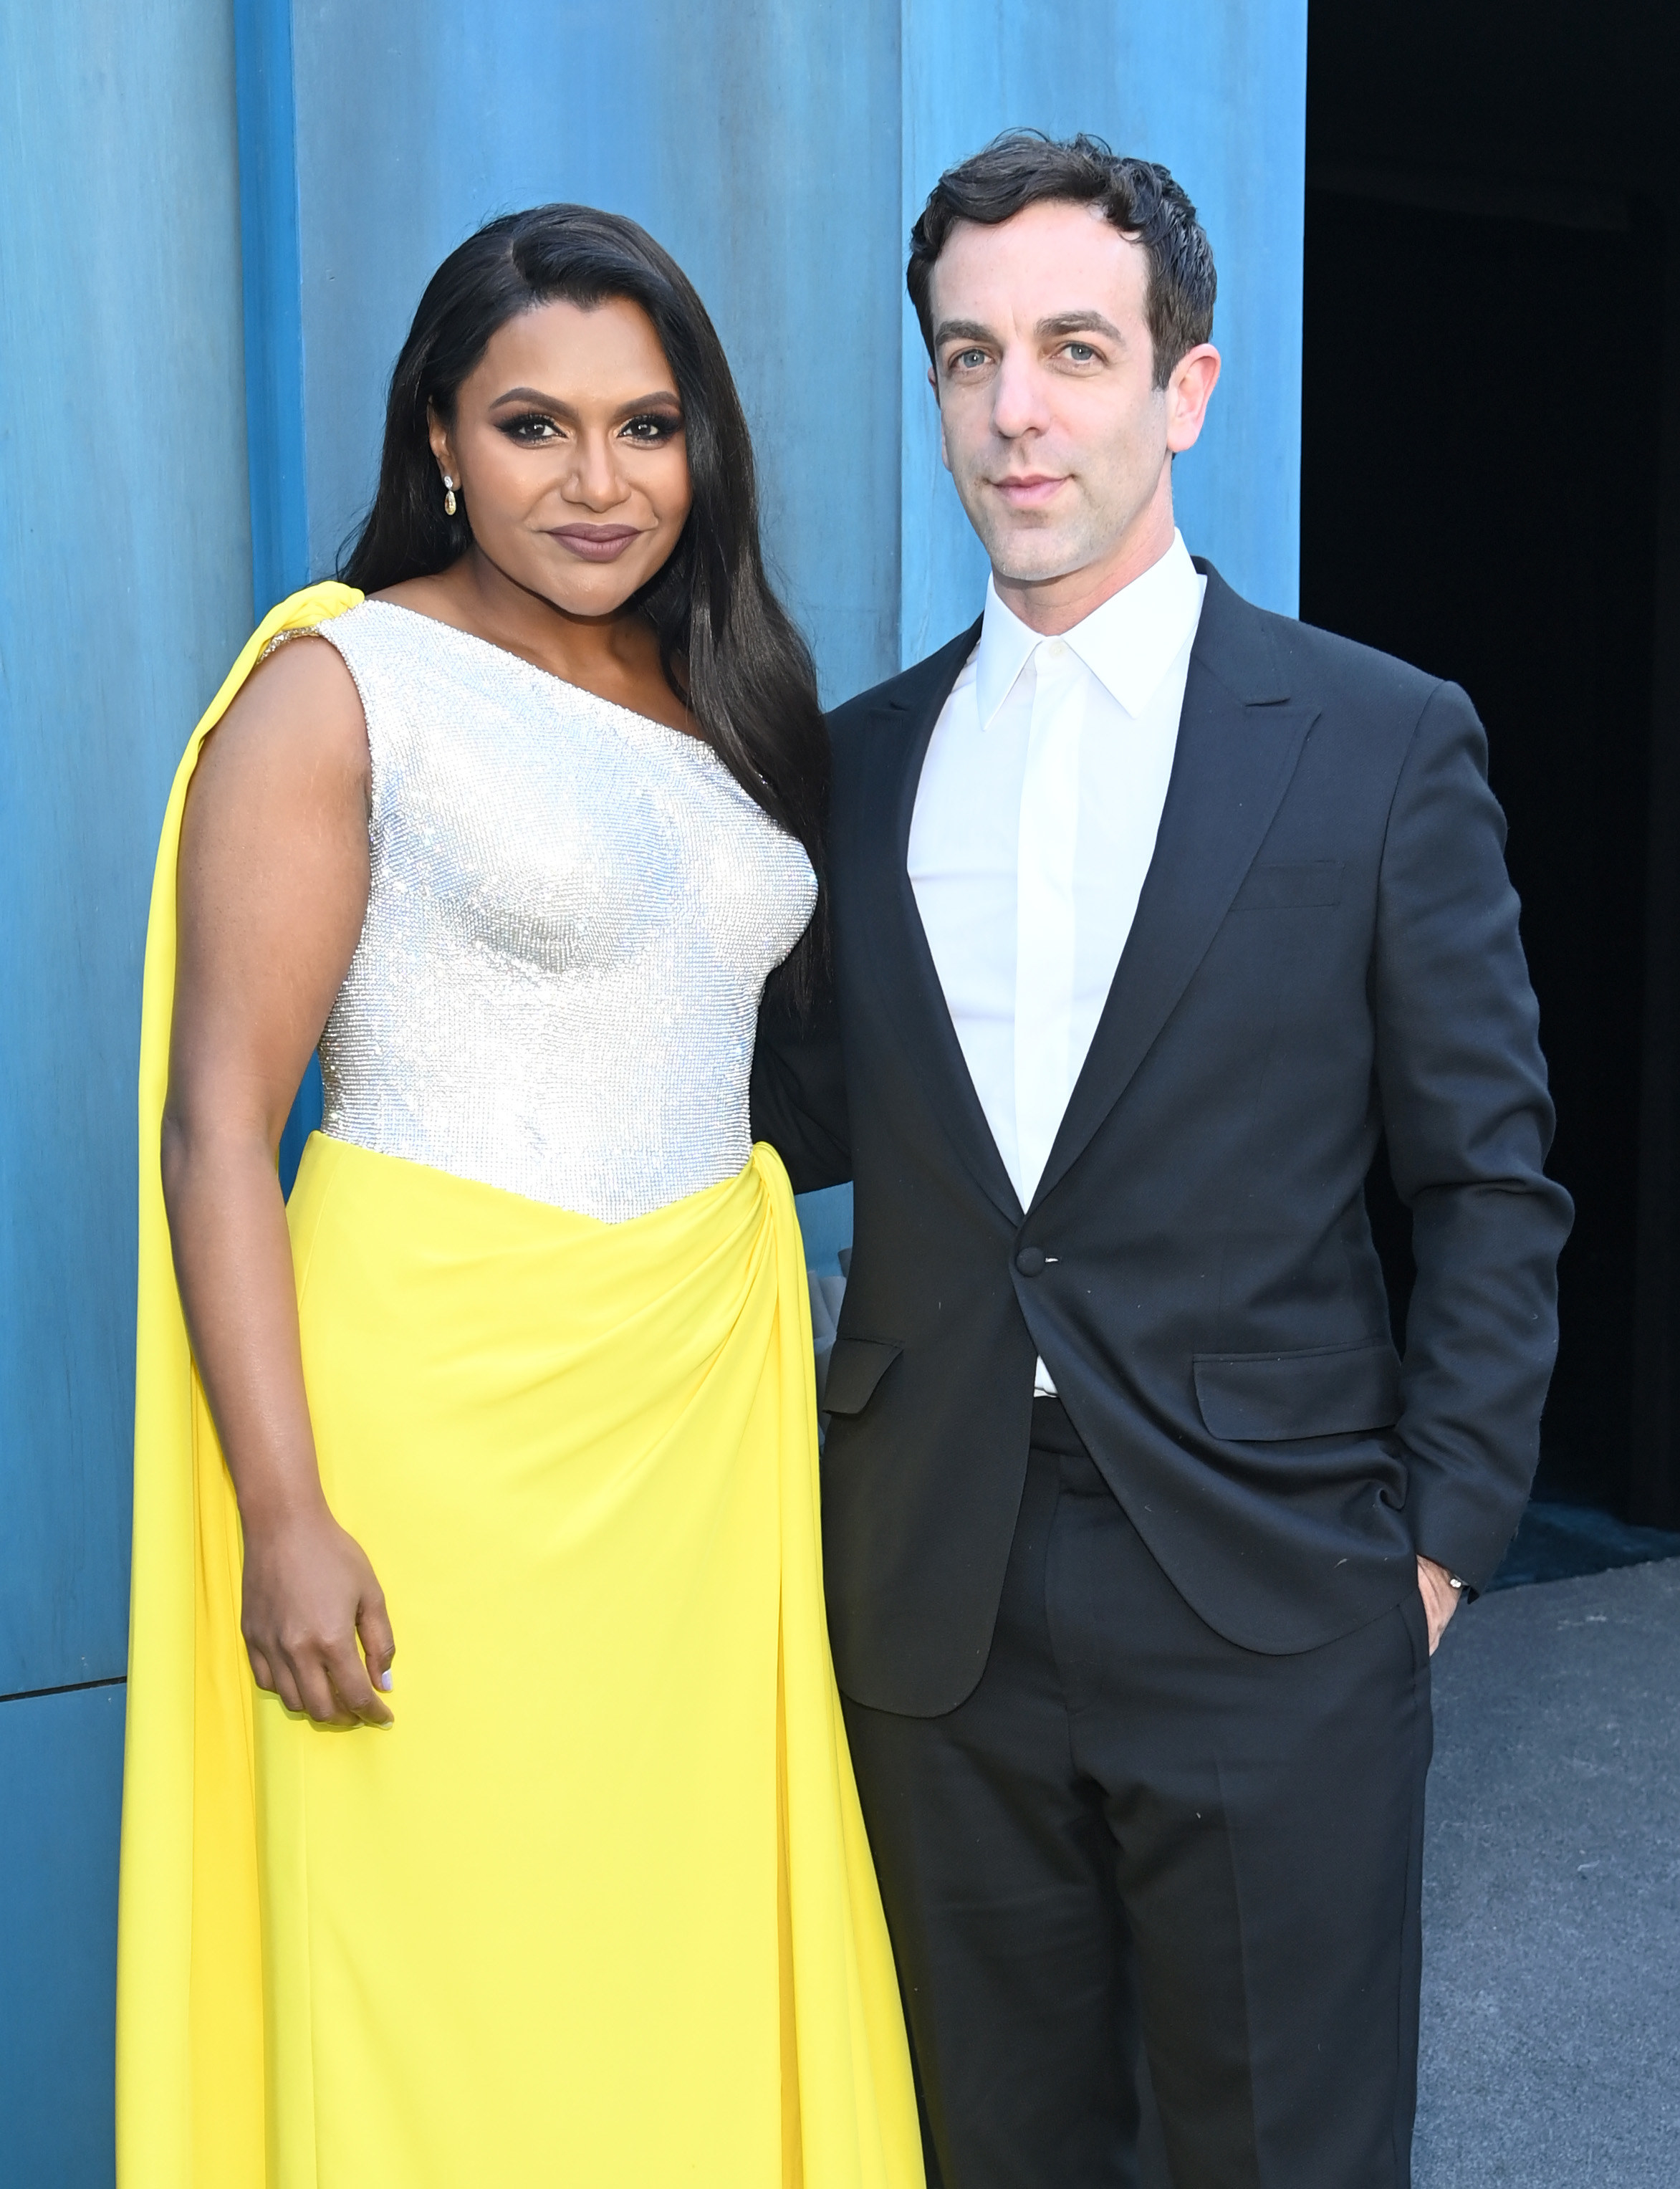 Mindy wearing a one-shoulder gown as she stands next to BJ